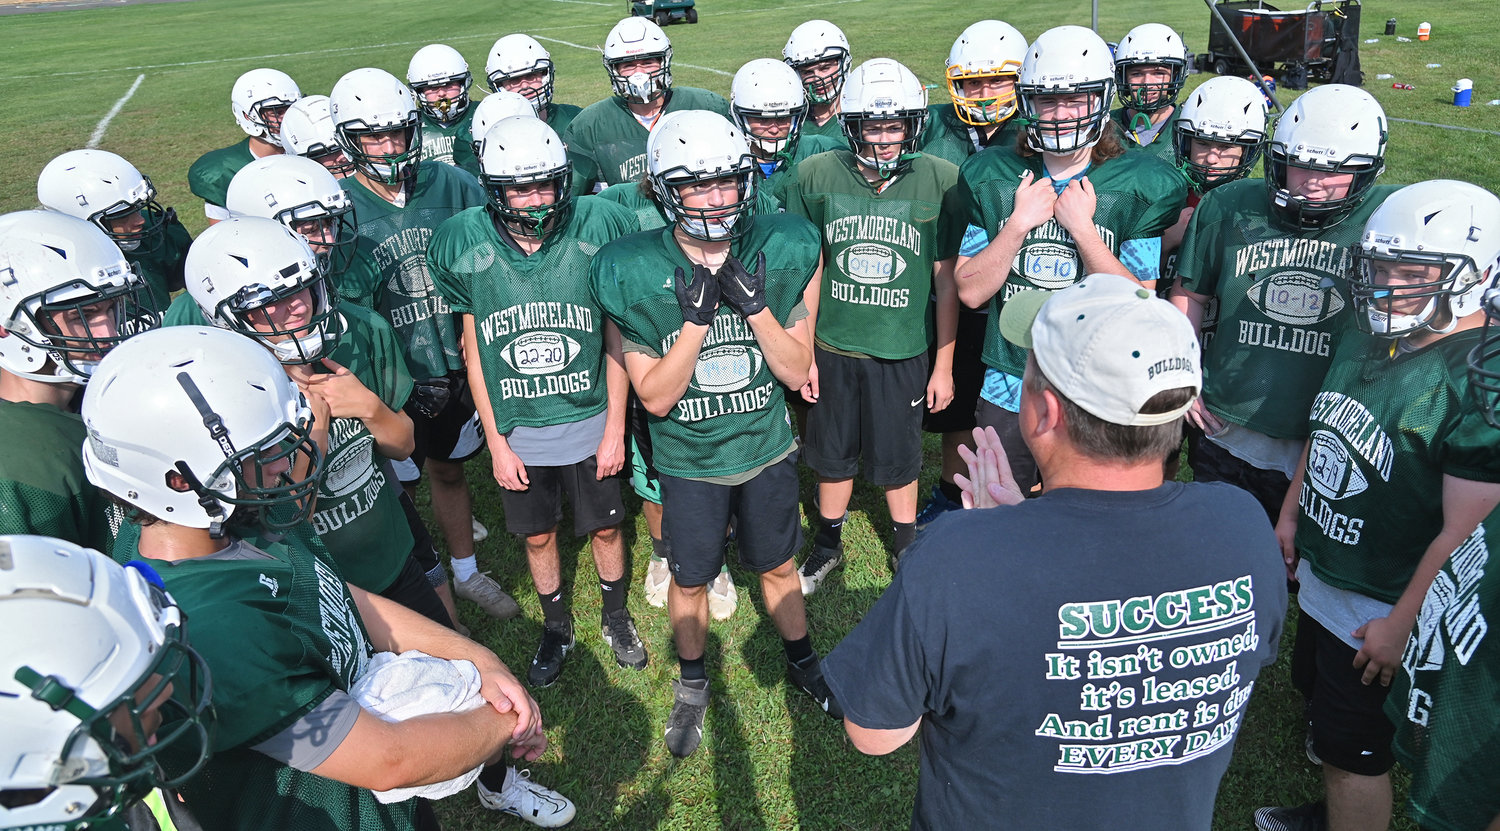 Westmoreland/Oriskany defensive coordinator Greg Williams talks to the team before the Bulldogs break up for defensive drills on Aug. 25.